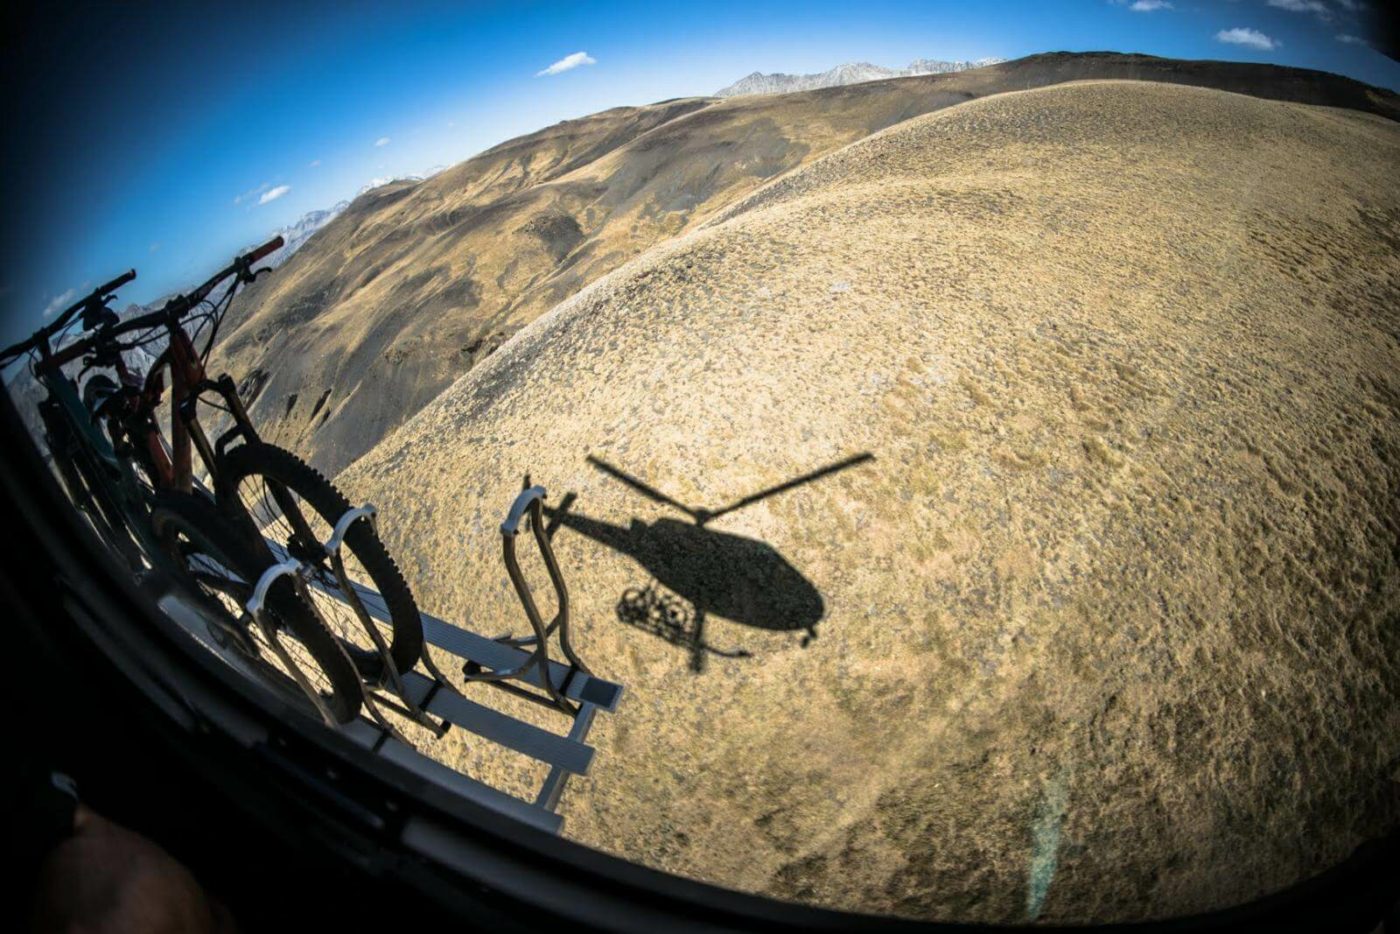 View from above, in the helicopter, of the helicopter's shadow as it takes mountain bike riders to Pyrenees mountains.